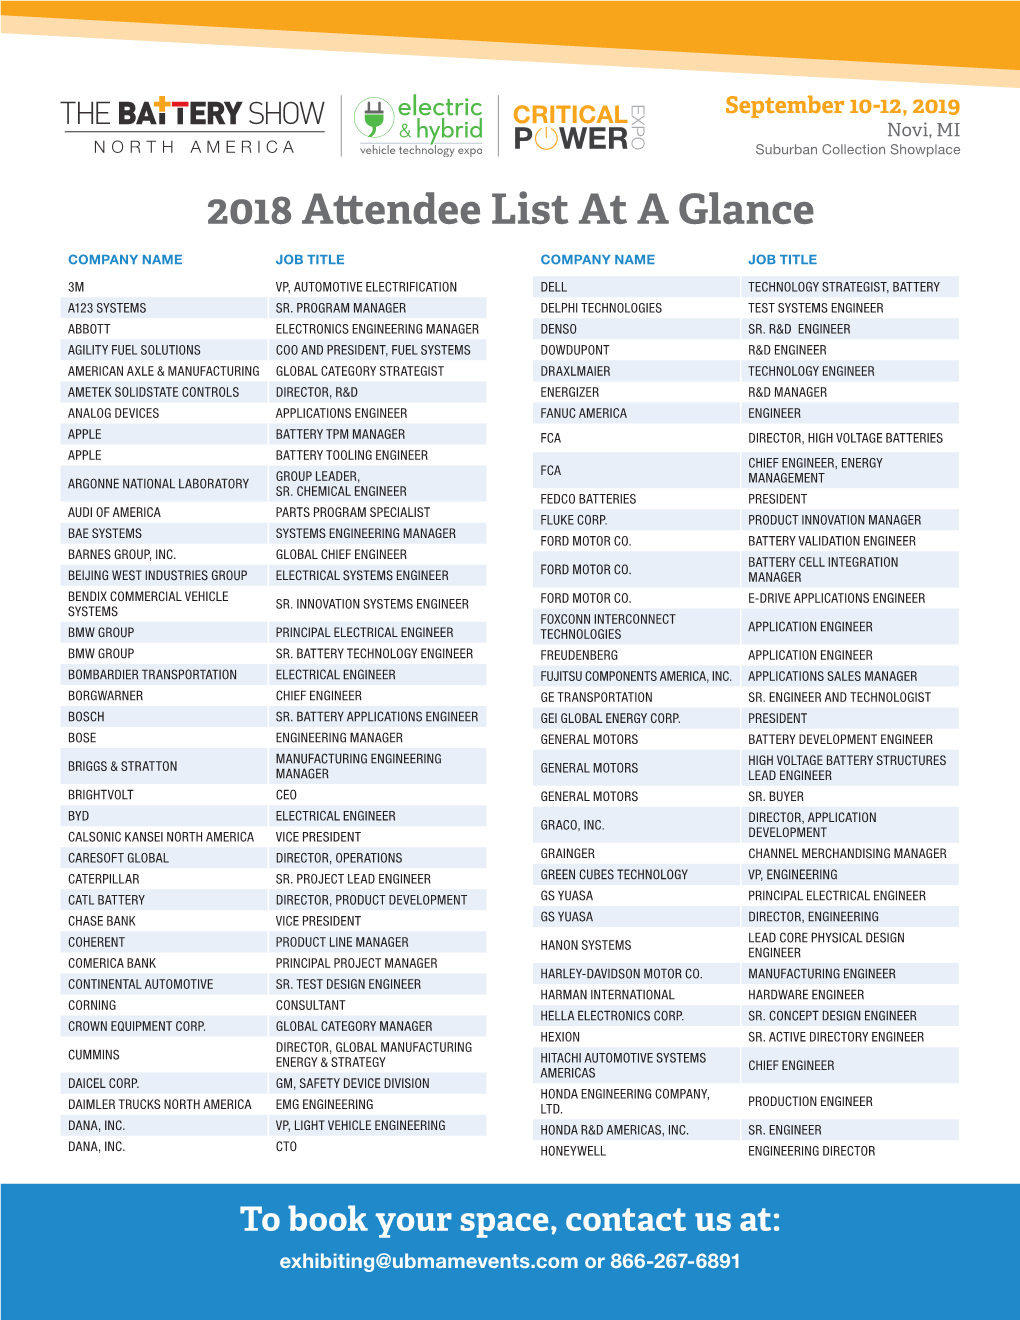 2018 Attendee List at a Glance